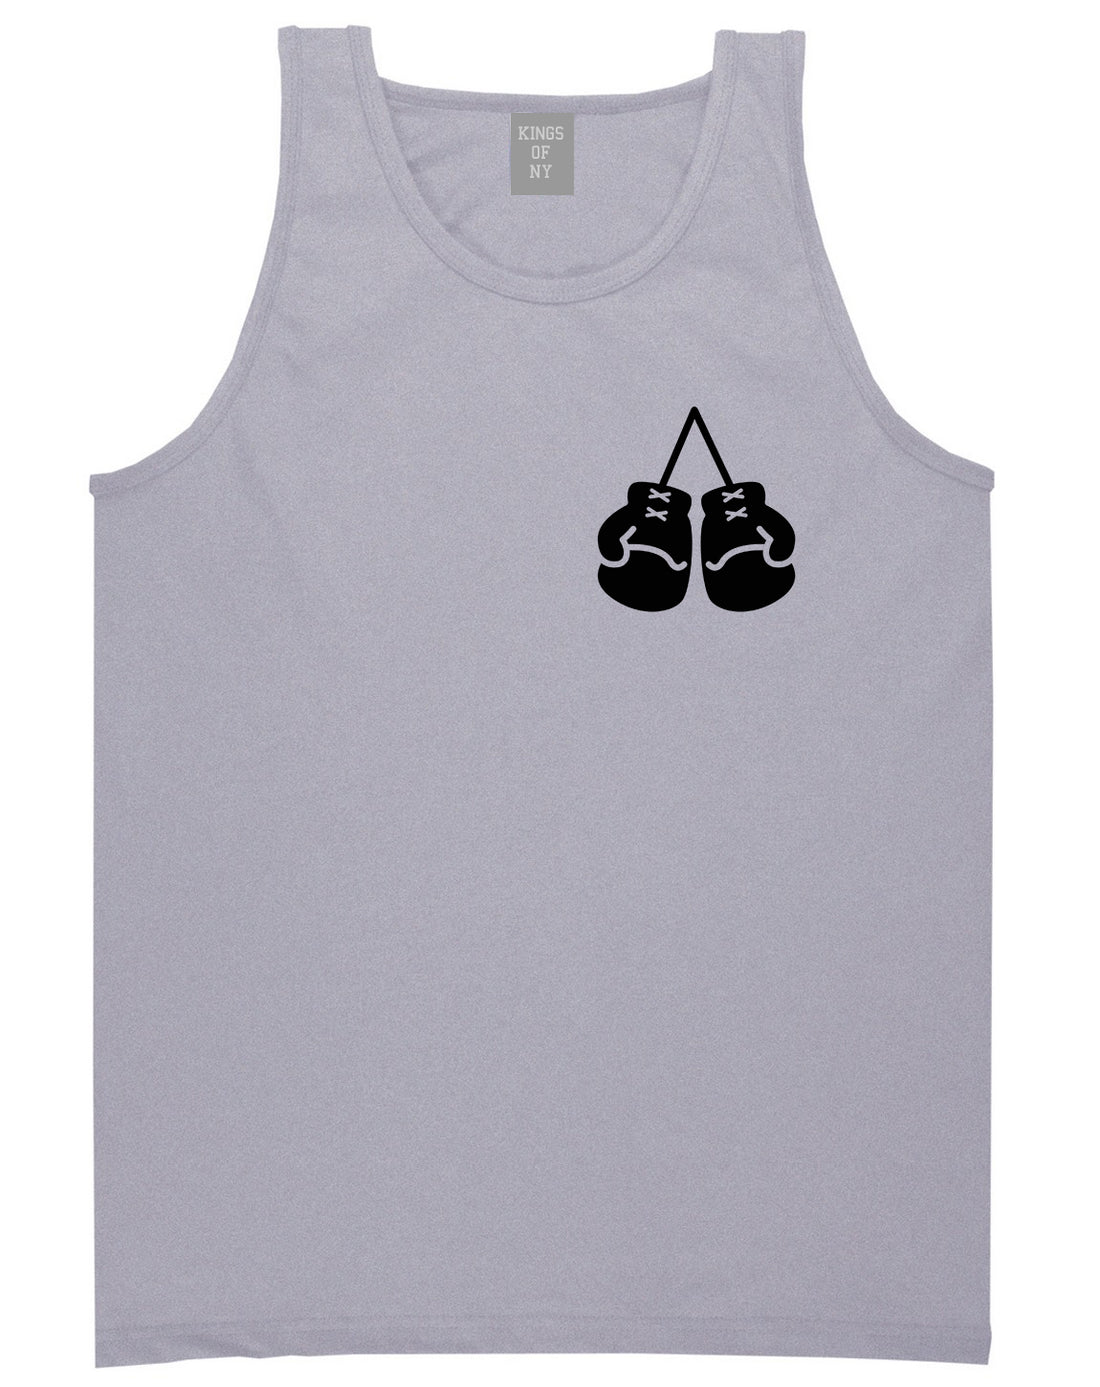 Boxing Gloves Chest Grey Tank Top Shirt by Kings Of NY